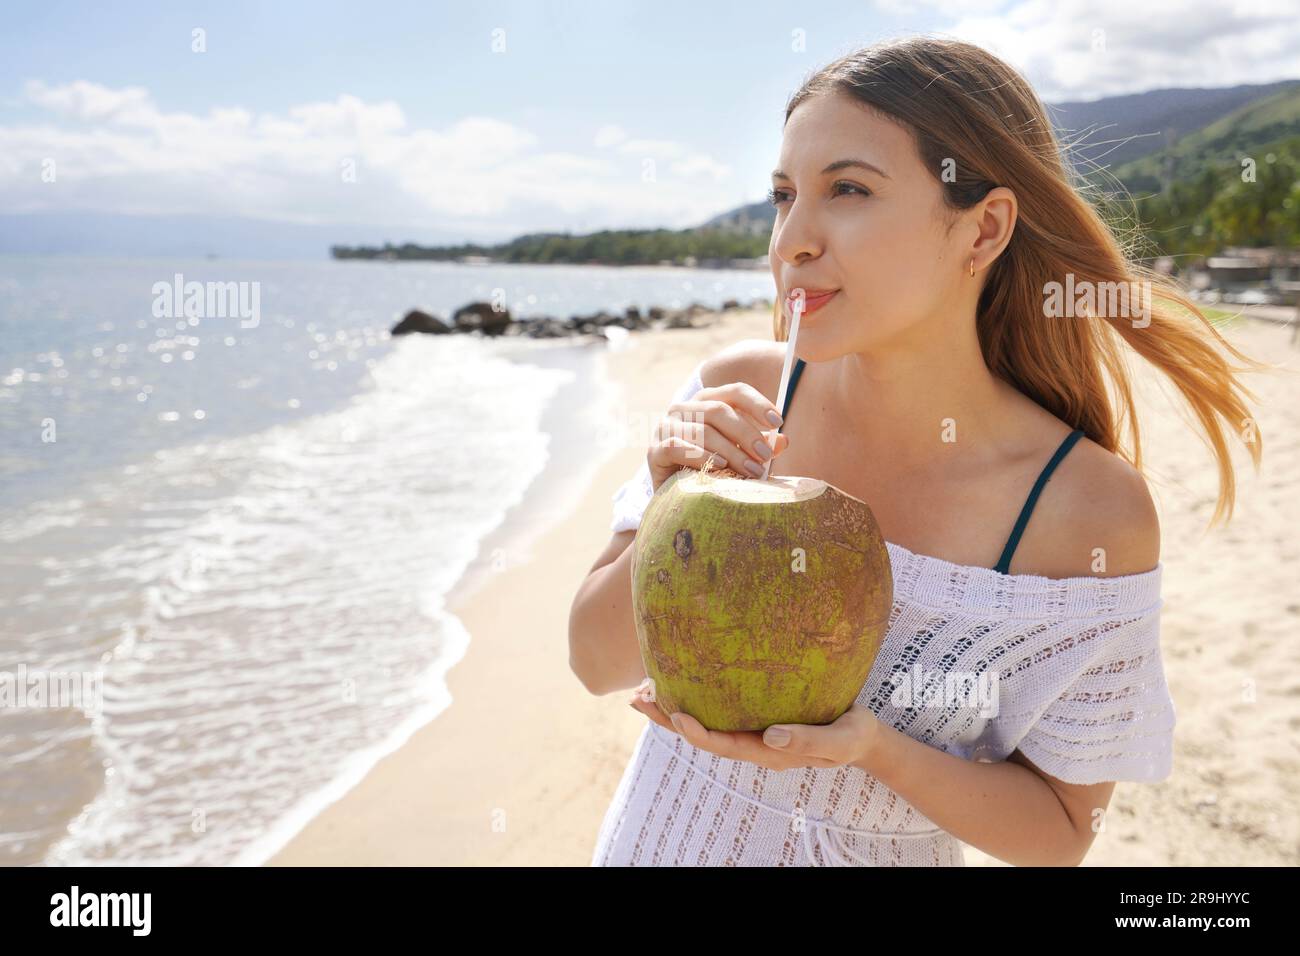 Brazilian girl drinking fresh coconut water on the beach. Refreshing and natural healthy green coconut concept. Stock Photo